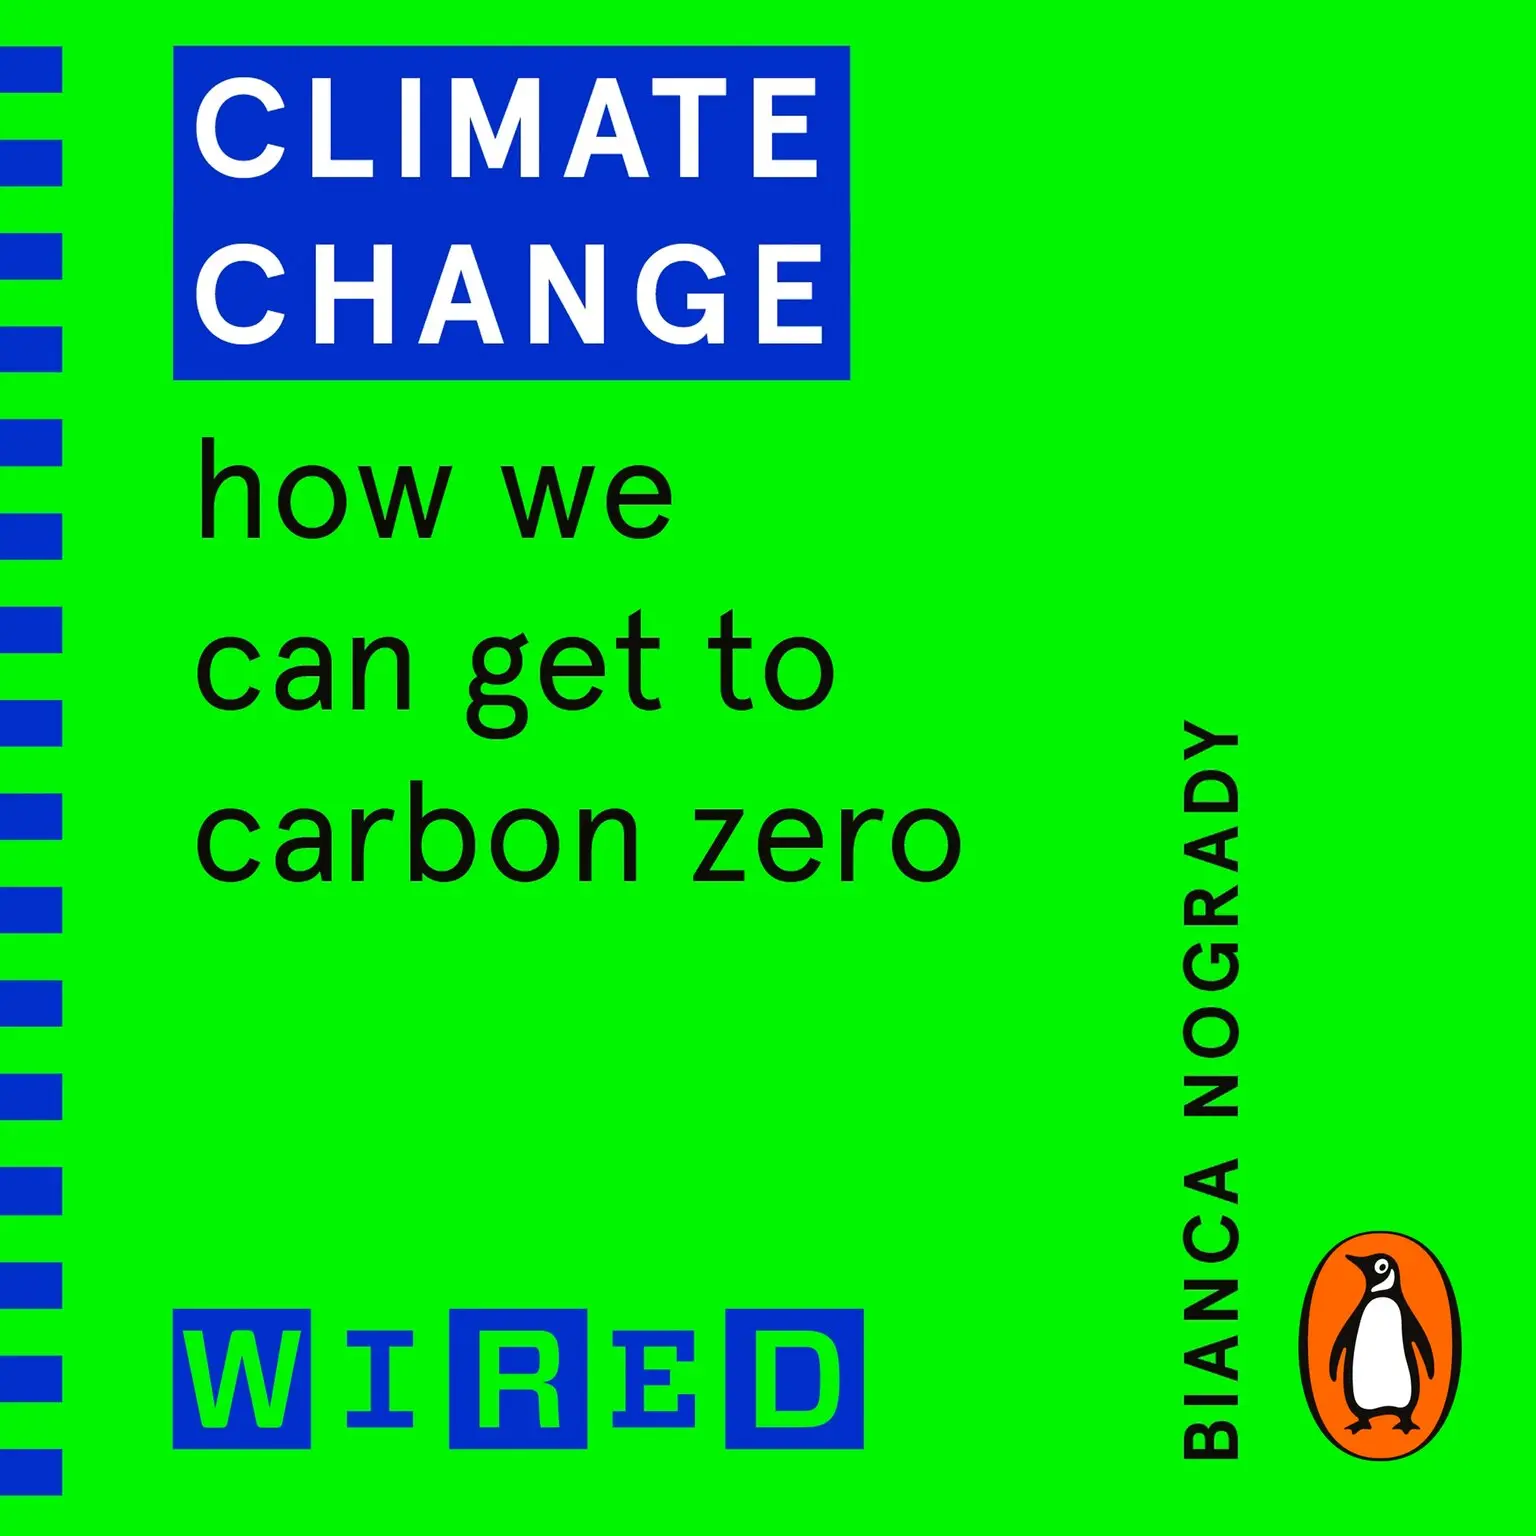 WIRED, Bianca Nogrady: Climate Change (2021, Penguin Random House)